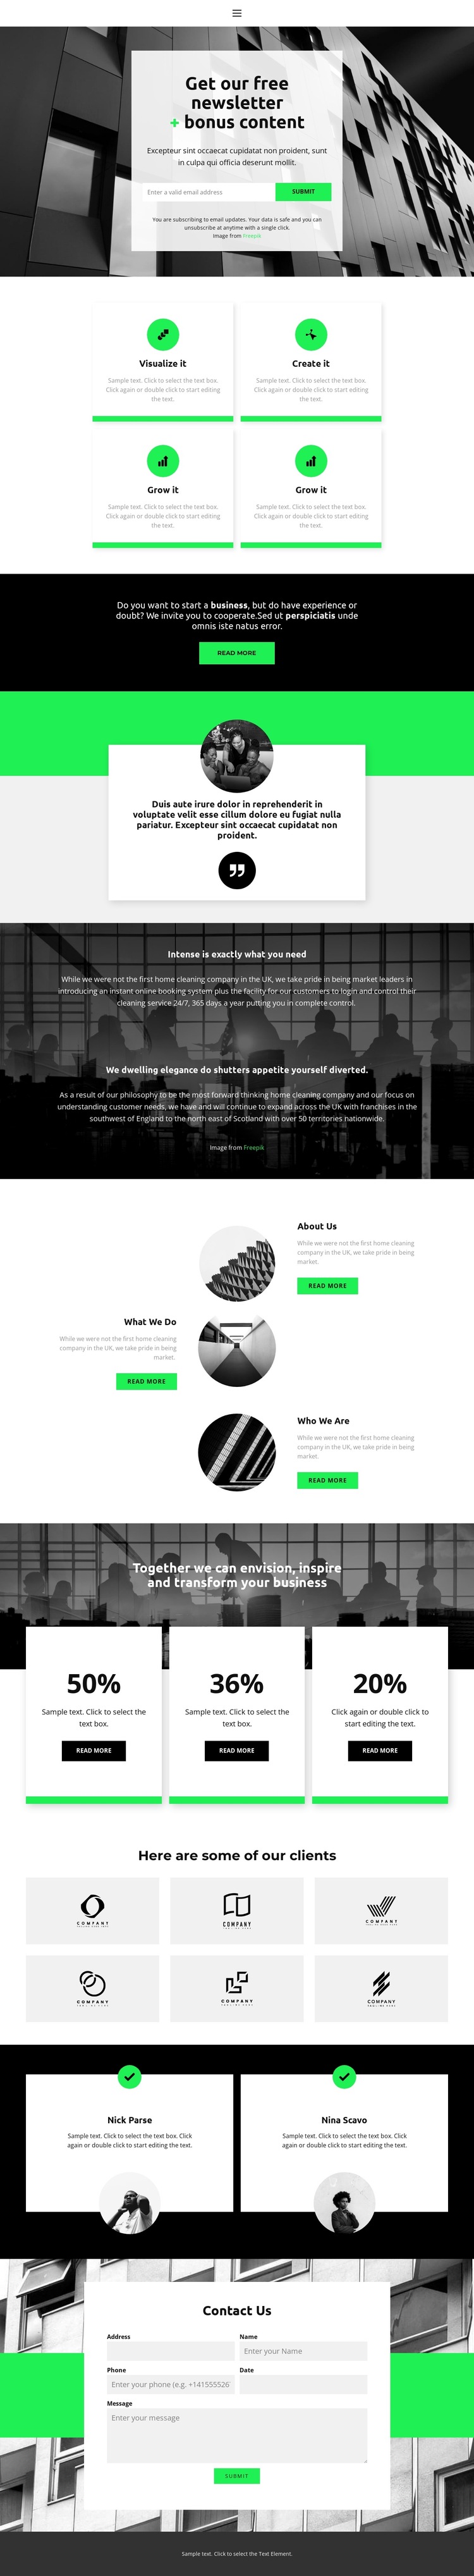 Get a free chance HTML5 Template